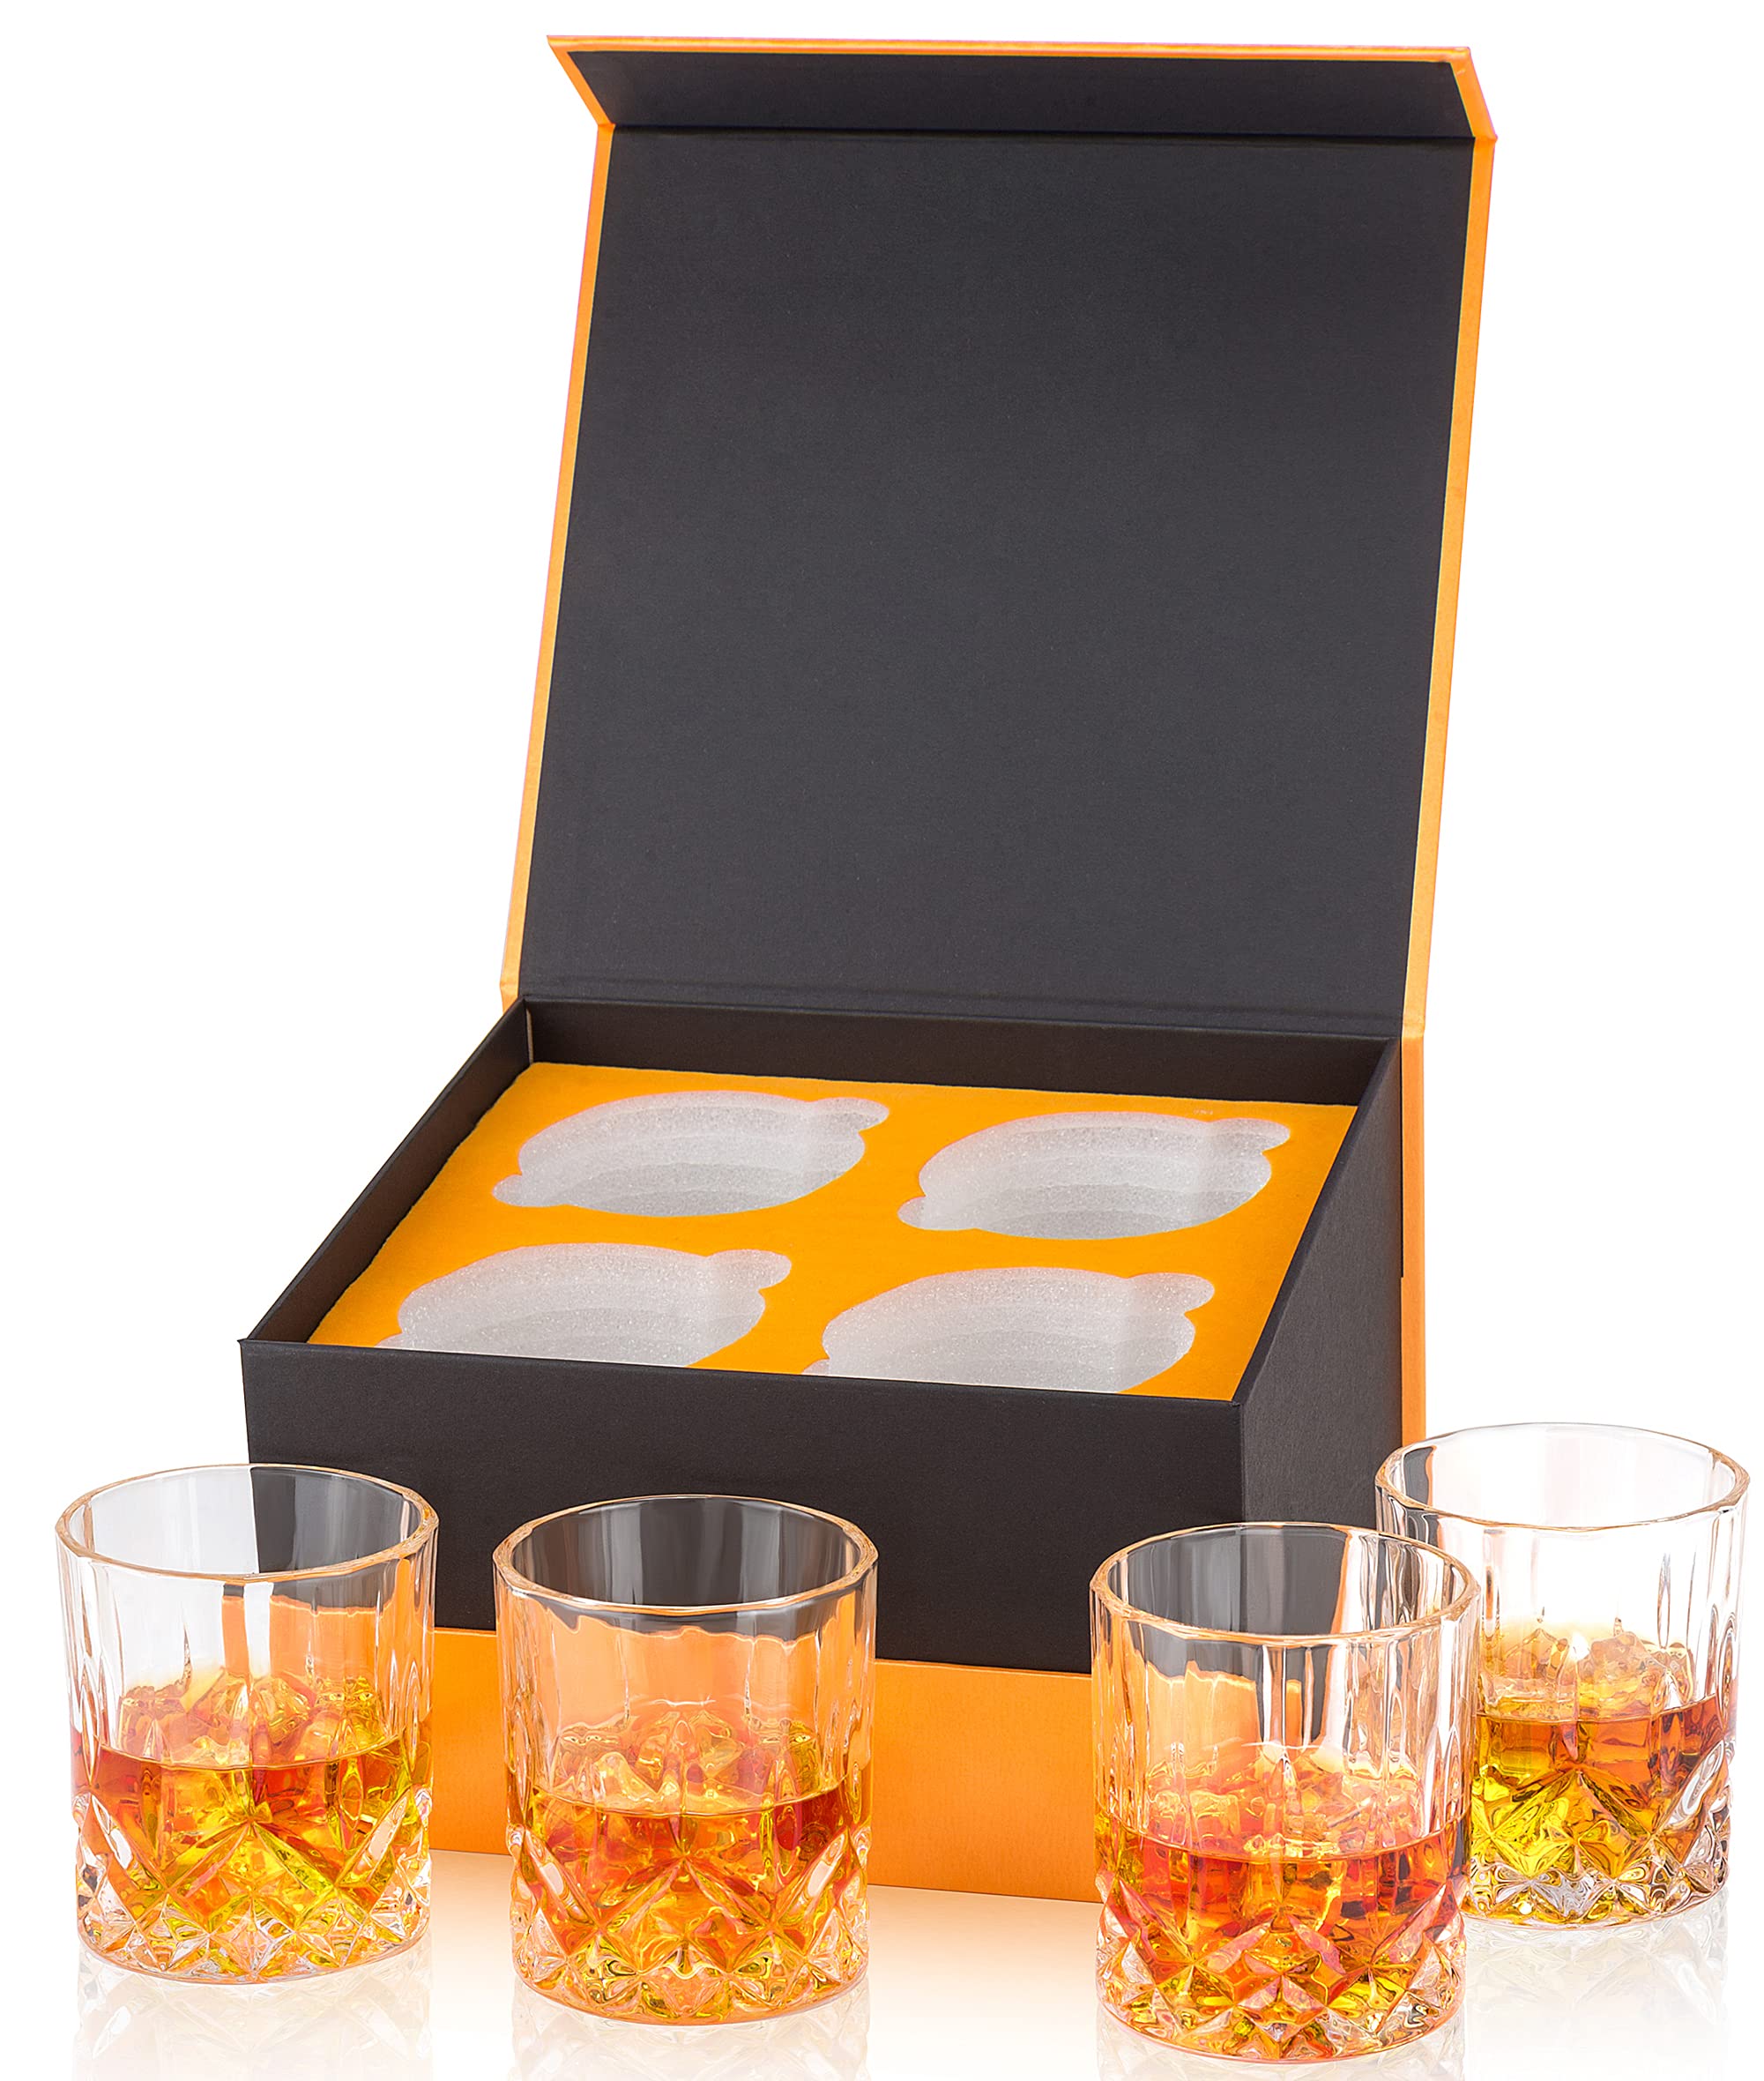 calliva von Old Fashioned Whiskey Glasses Set of 6, Heavy Crystal Rocks Glass In Gifts Box. Large 10oz Lowball Bar Tumbler for Bourbon Scotch Whisky Cocktail Drinking